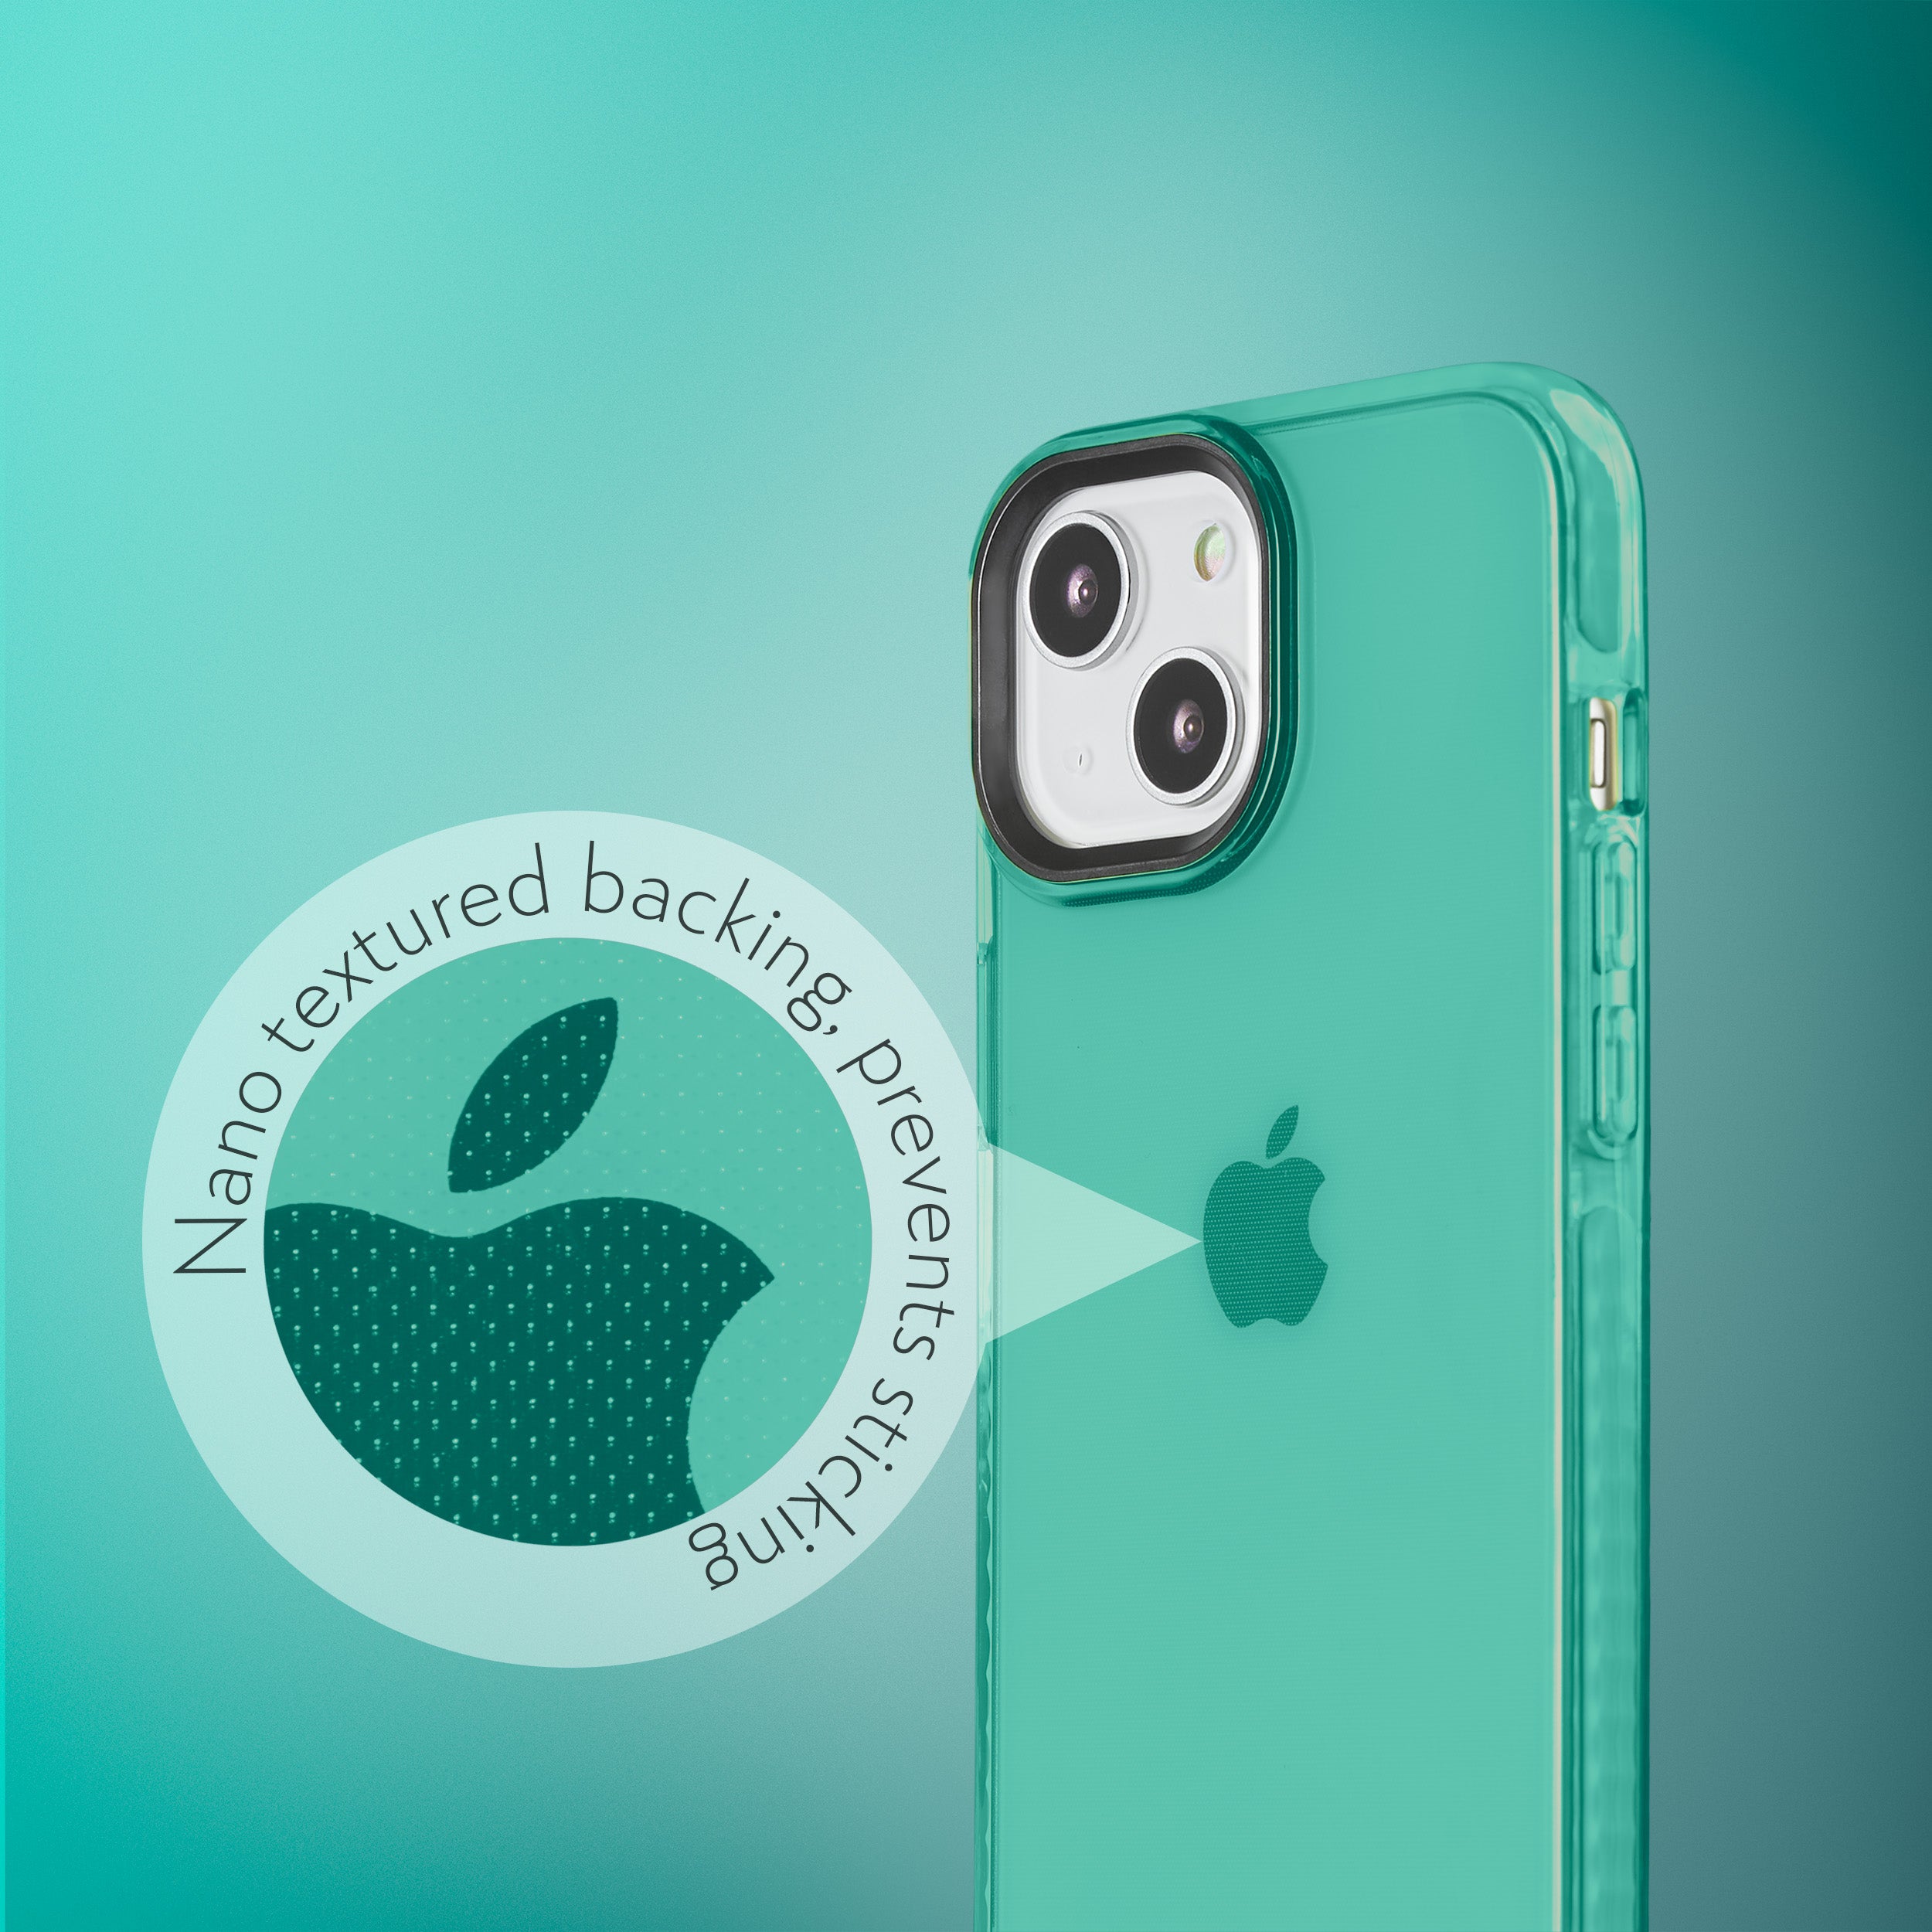 Barrier Case for iPhone 13 Mini - Polished Turquoise Blue